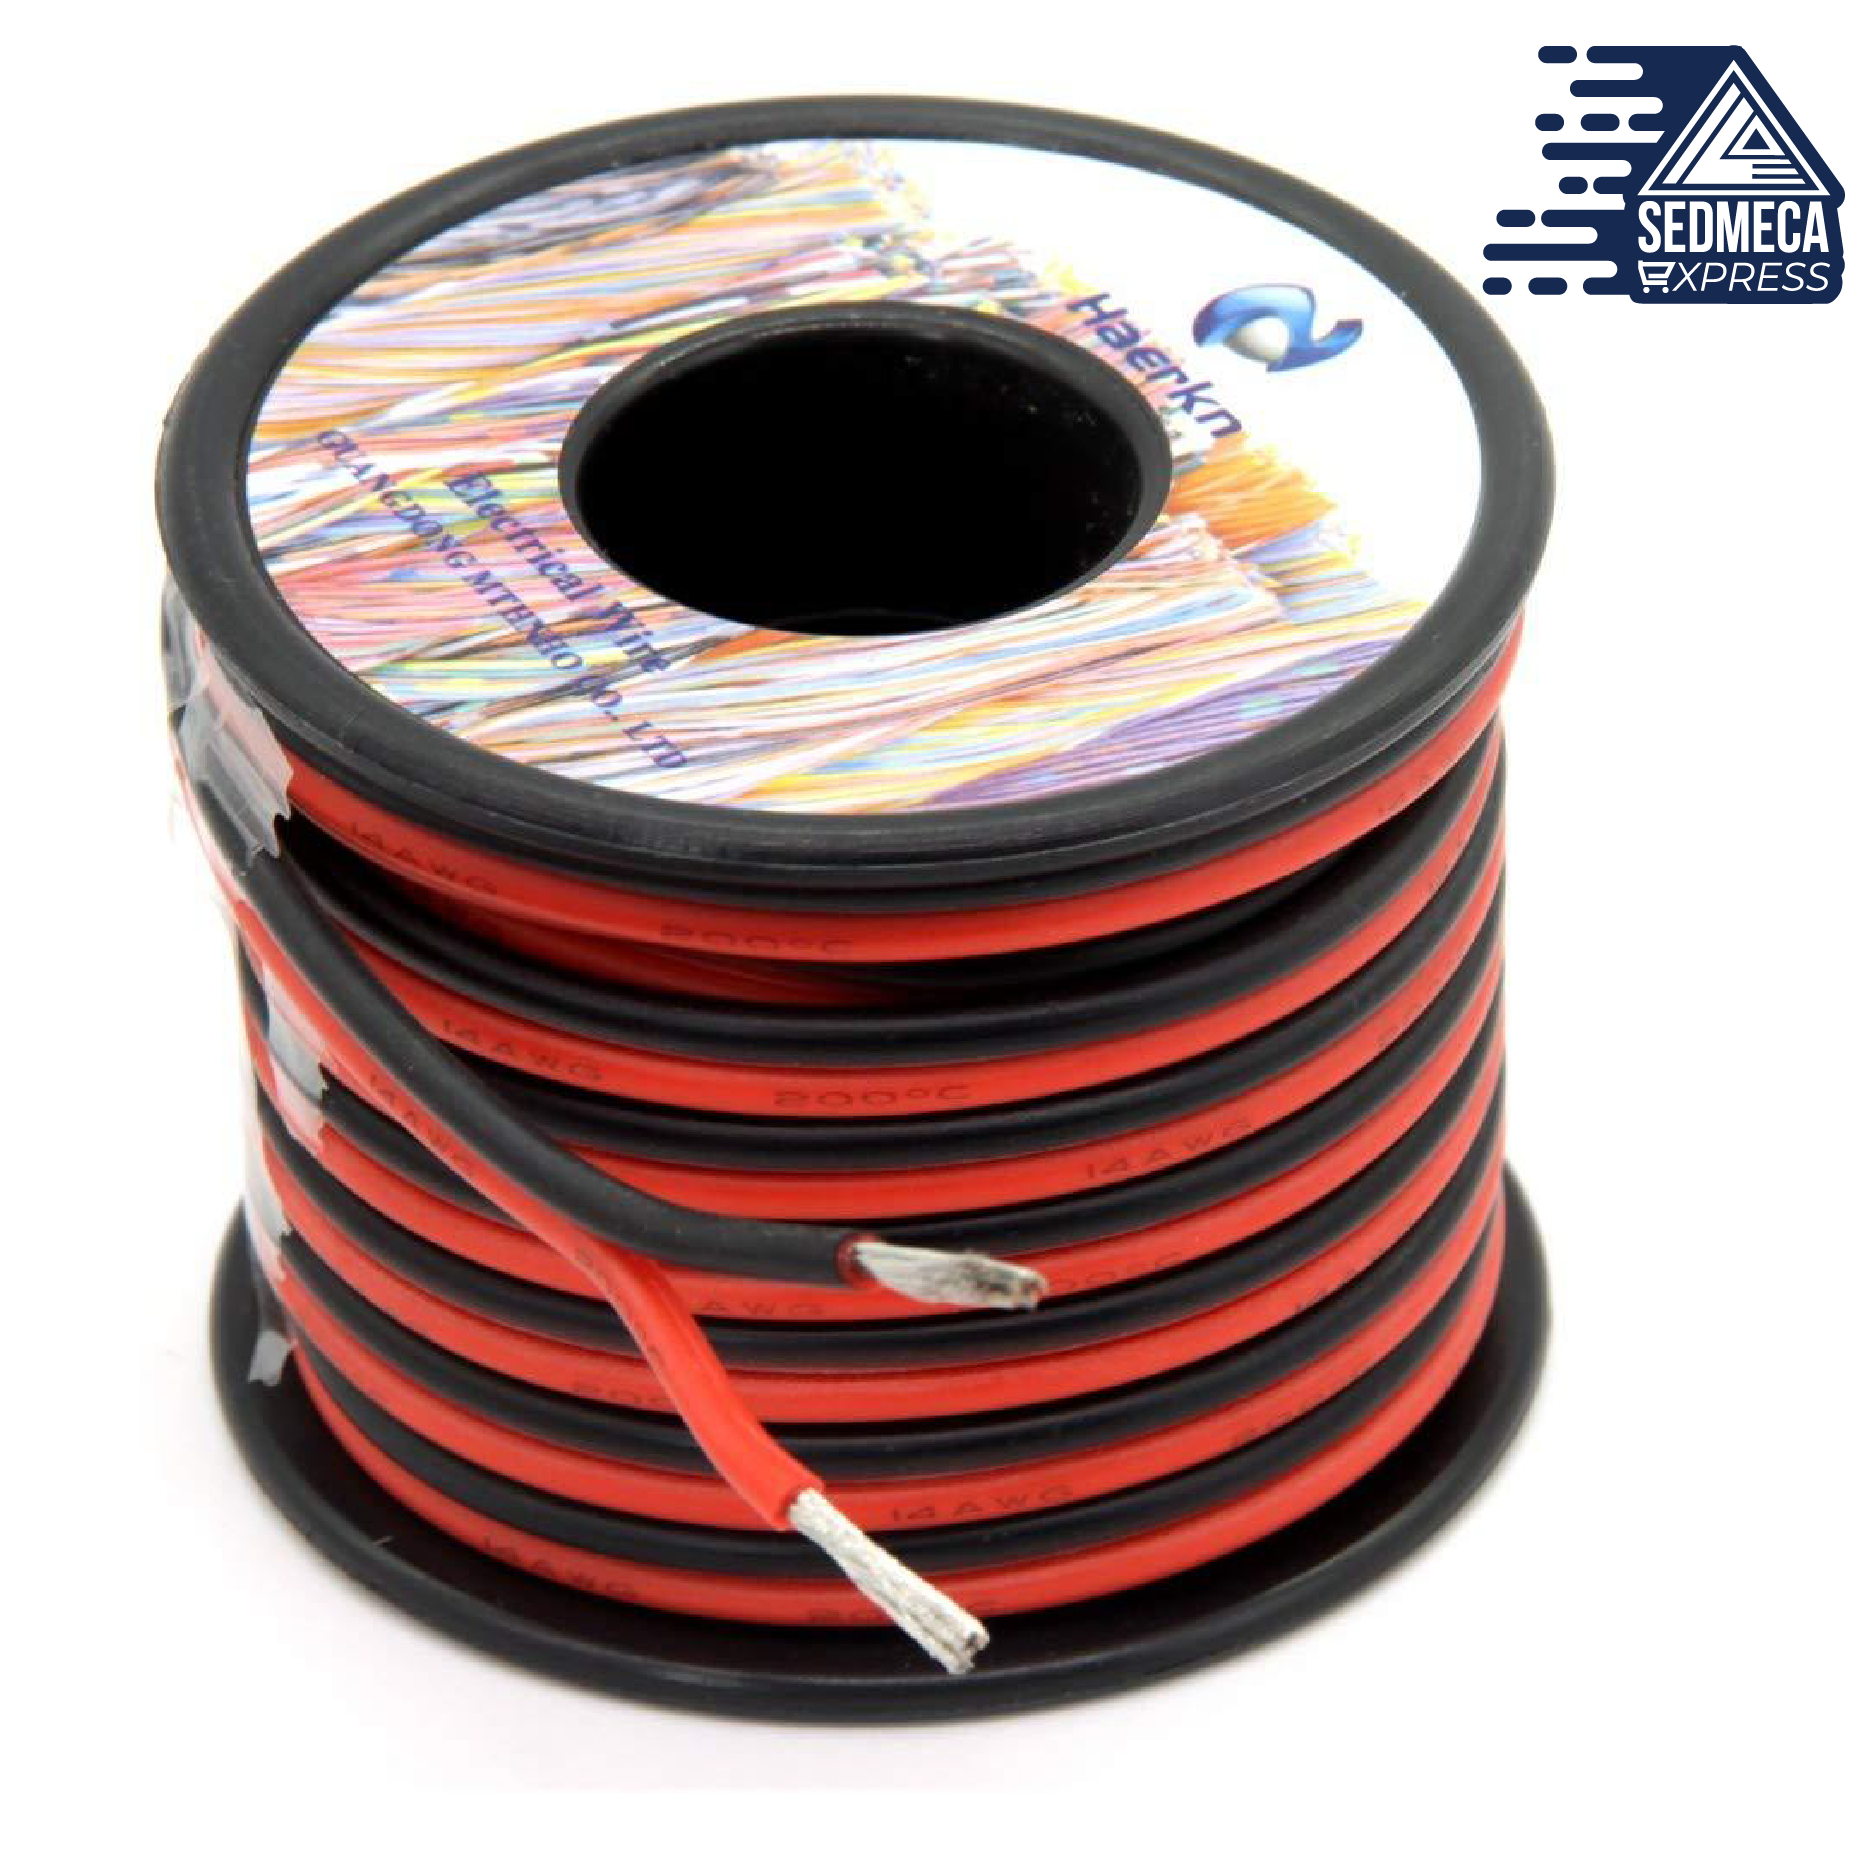 14 awg silicone wire 400 strands of tinned copper wire red black